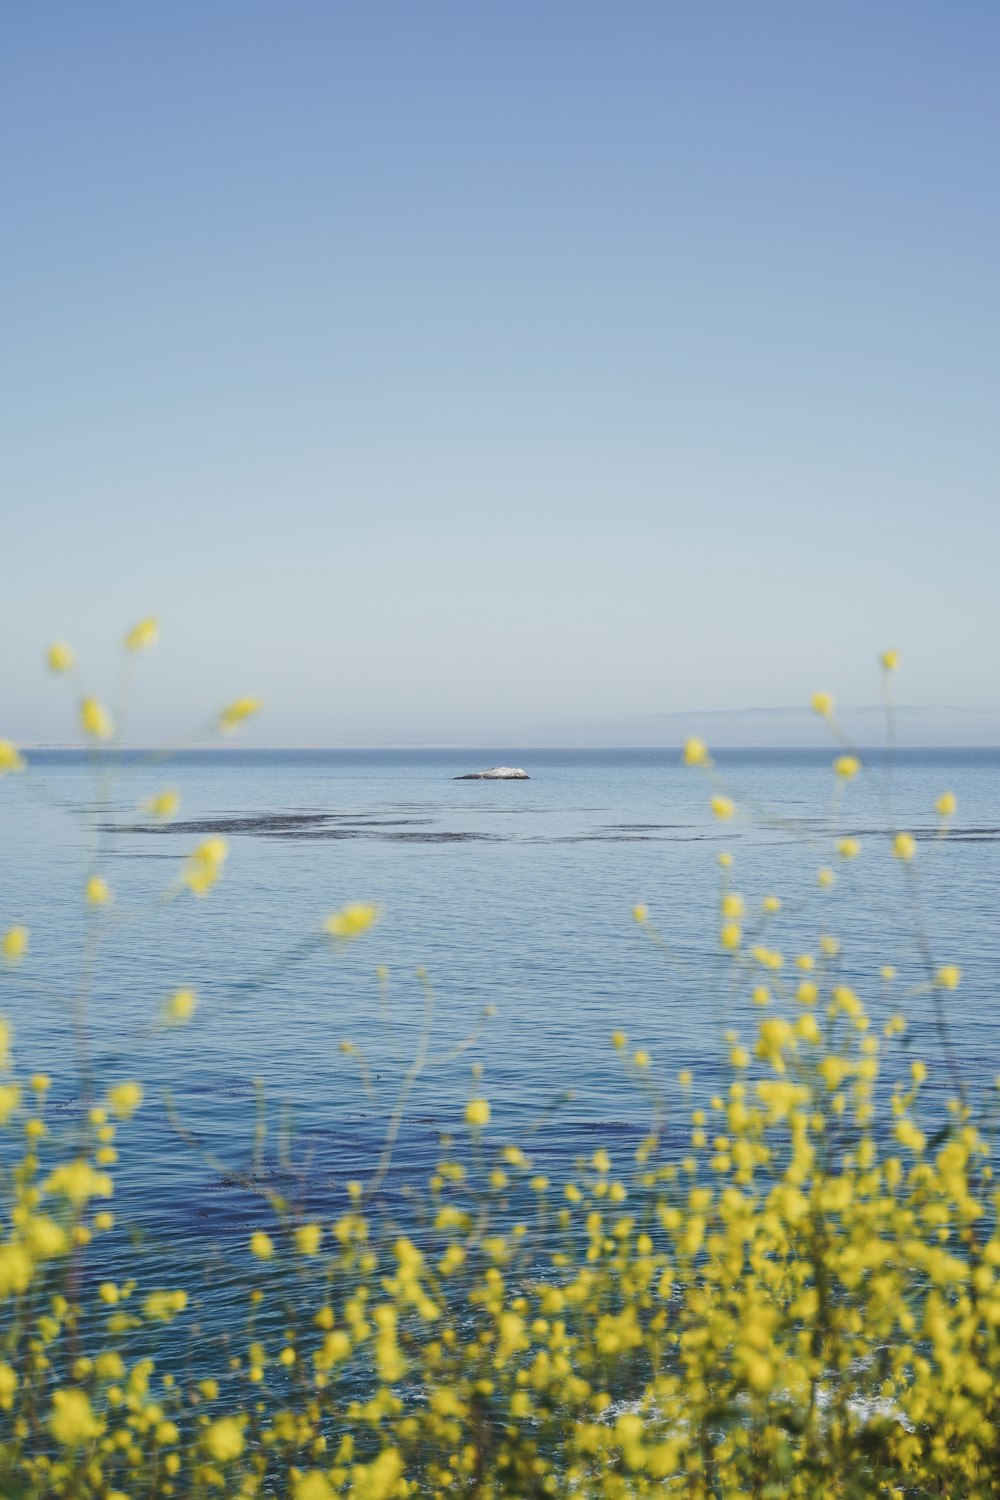 a boat is out on the water near some yellow flowers